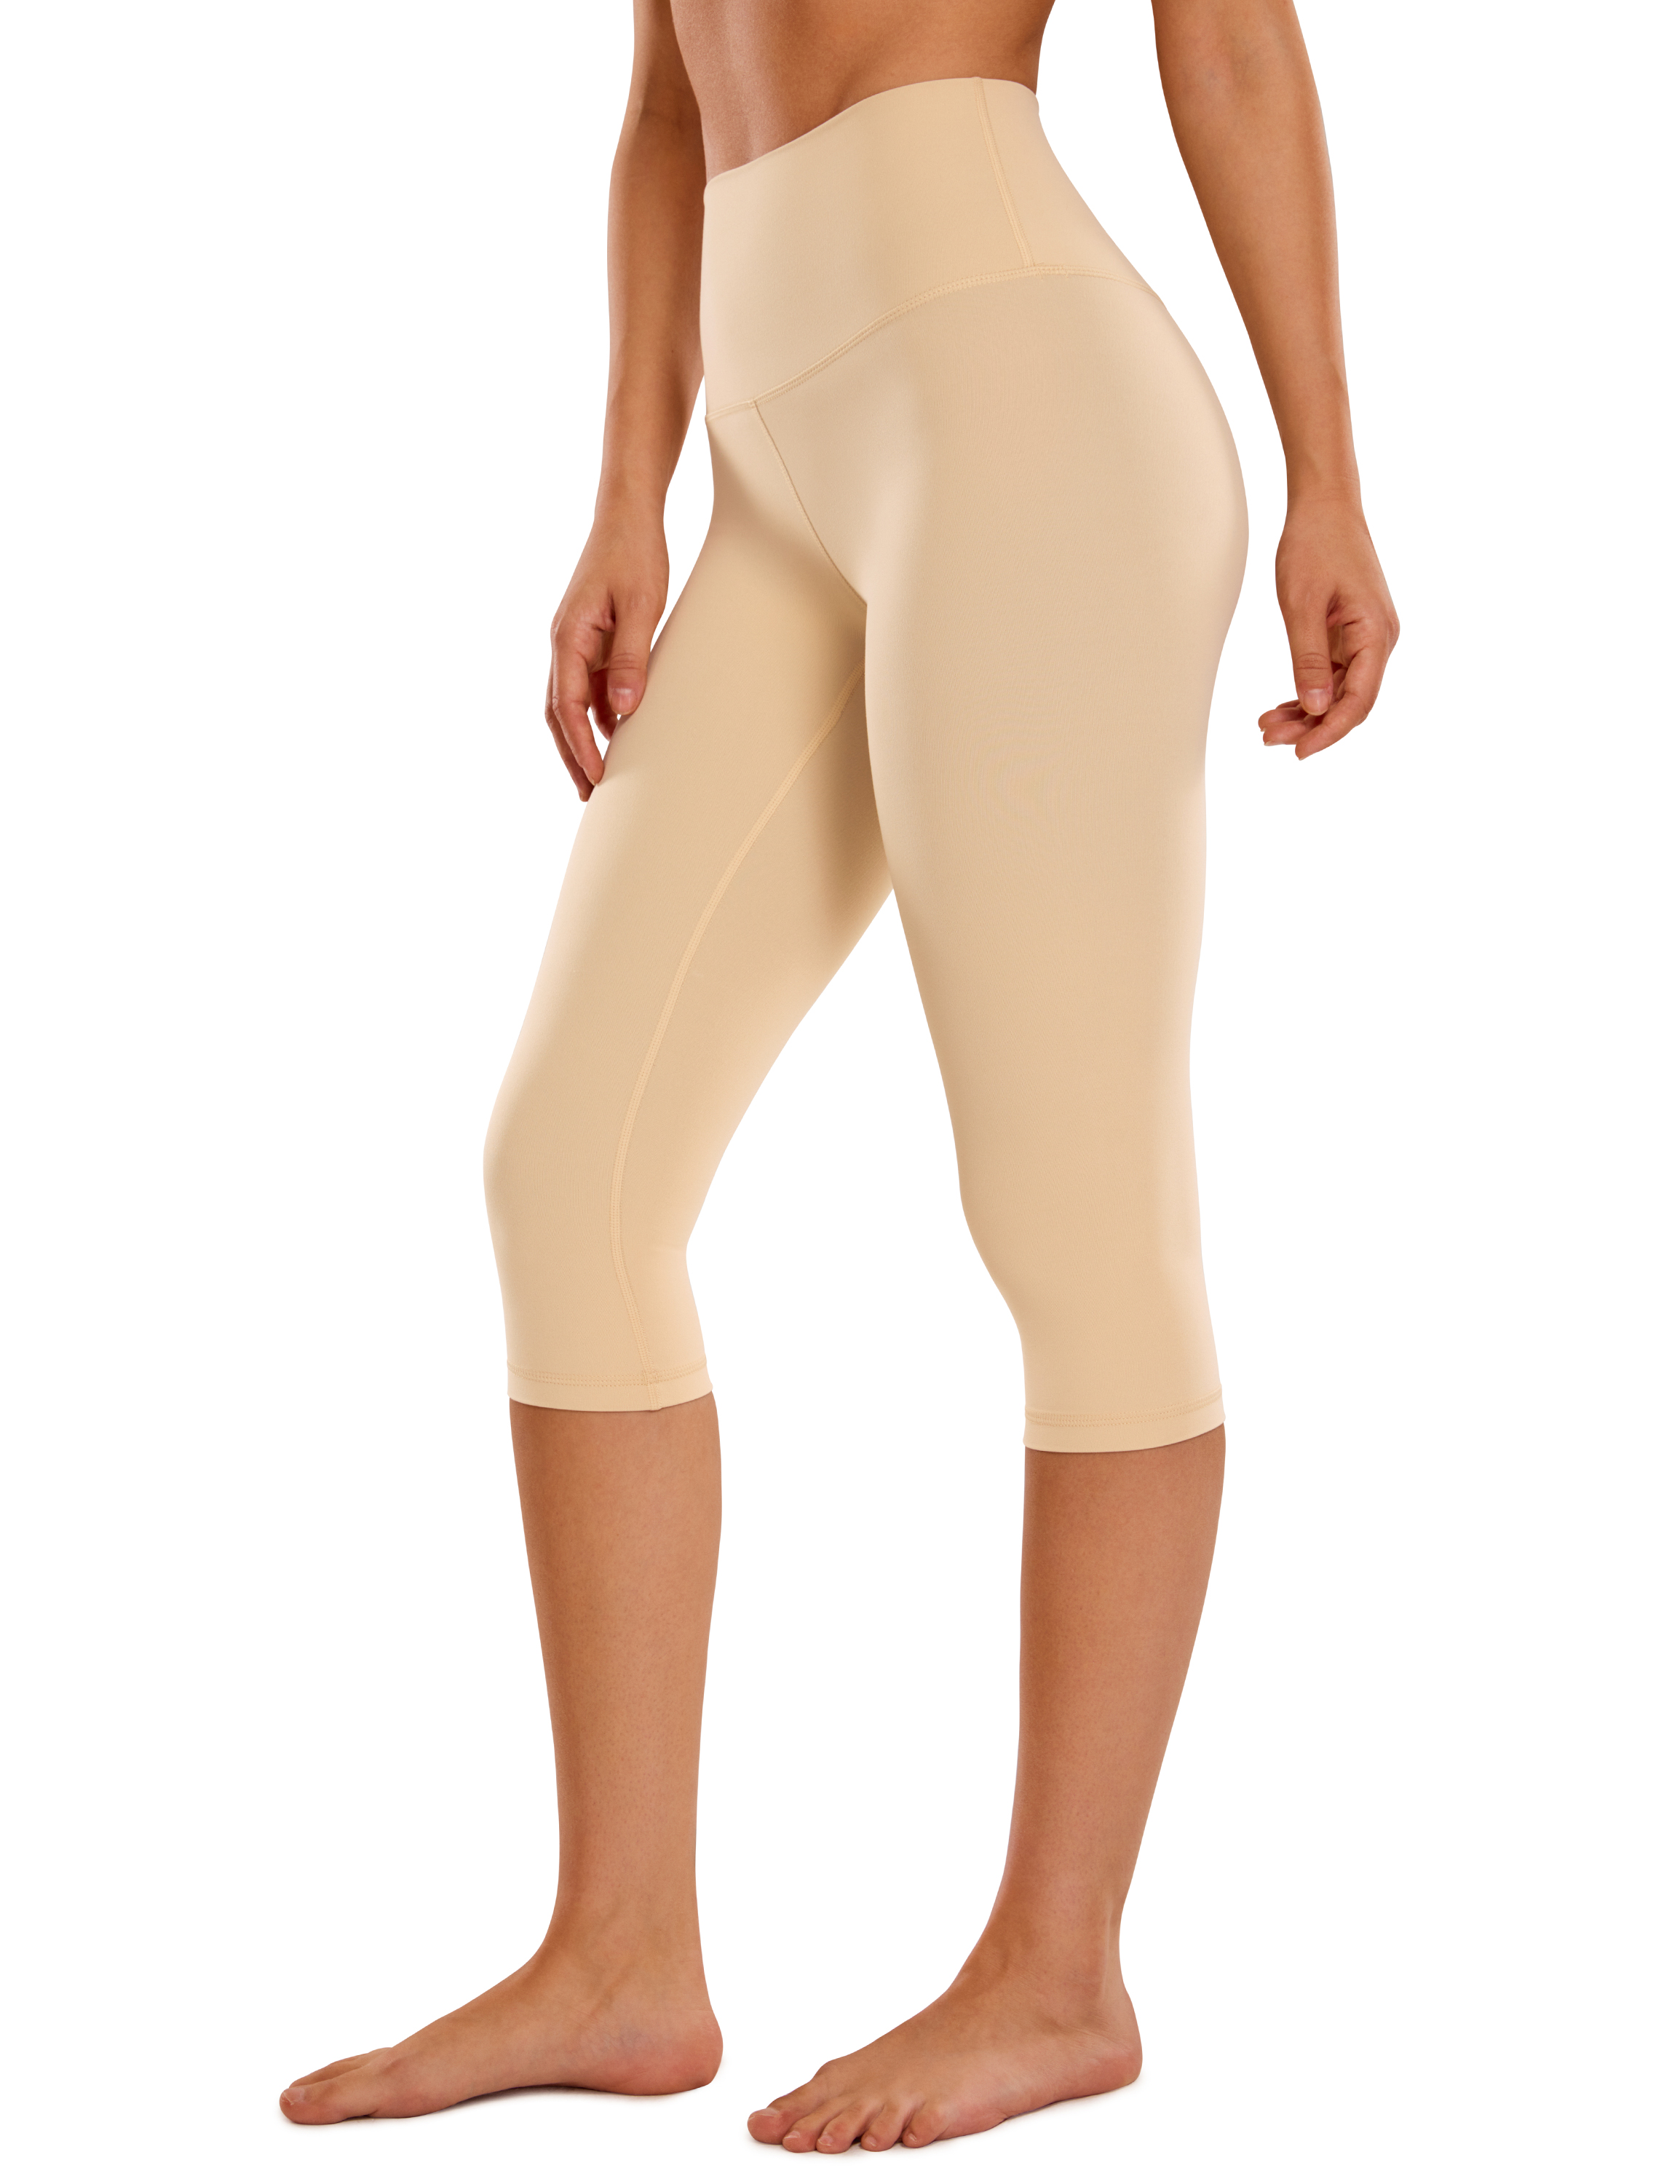 CRZ YOGA Womens Butterluxe Workout Capri Leggings with Pockets 21 Inches -  High Waisted Gym Athletic Crop Yoga Leggings